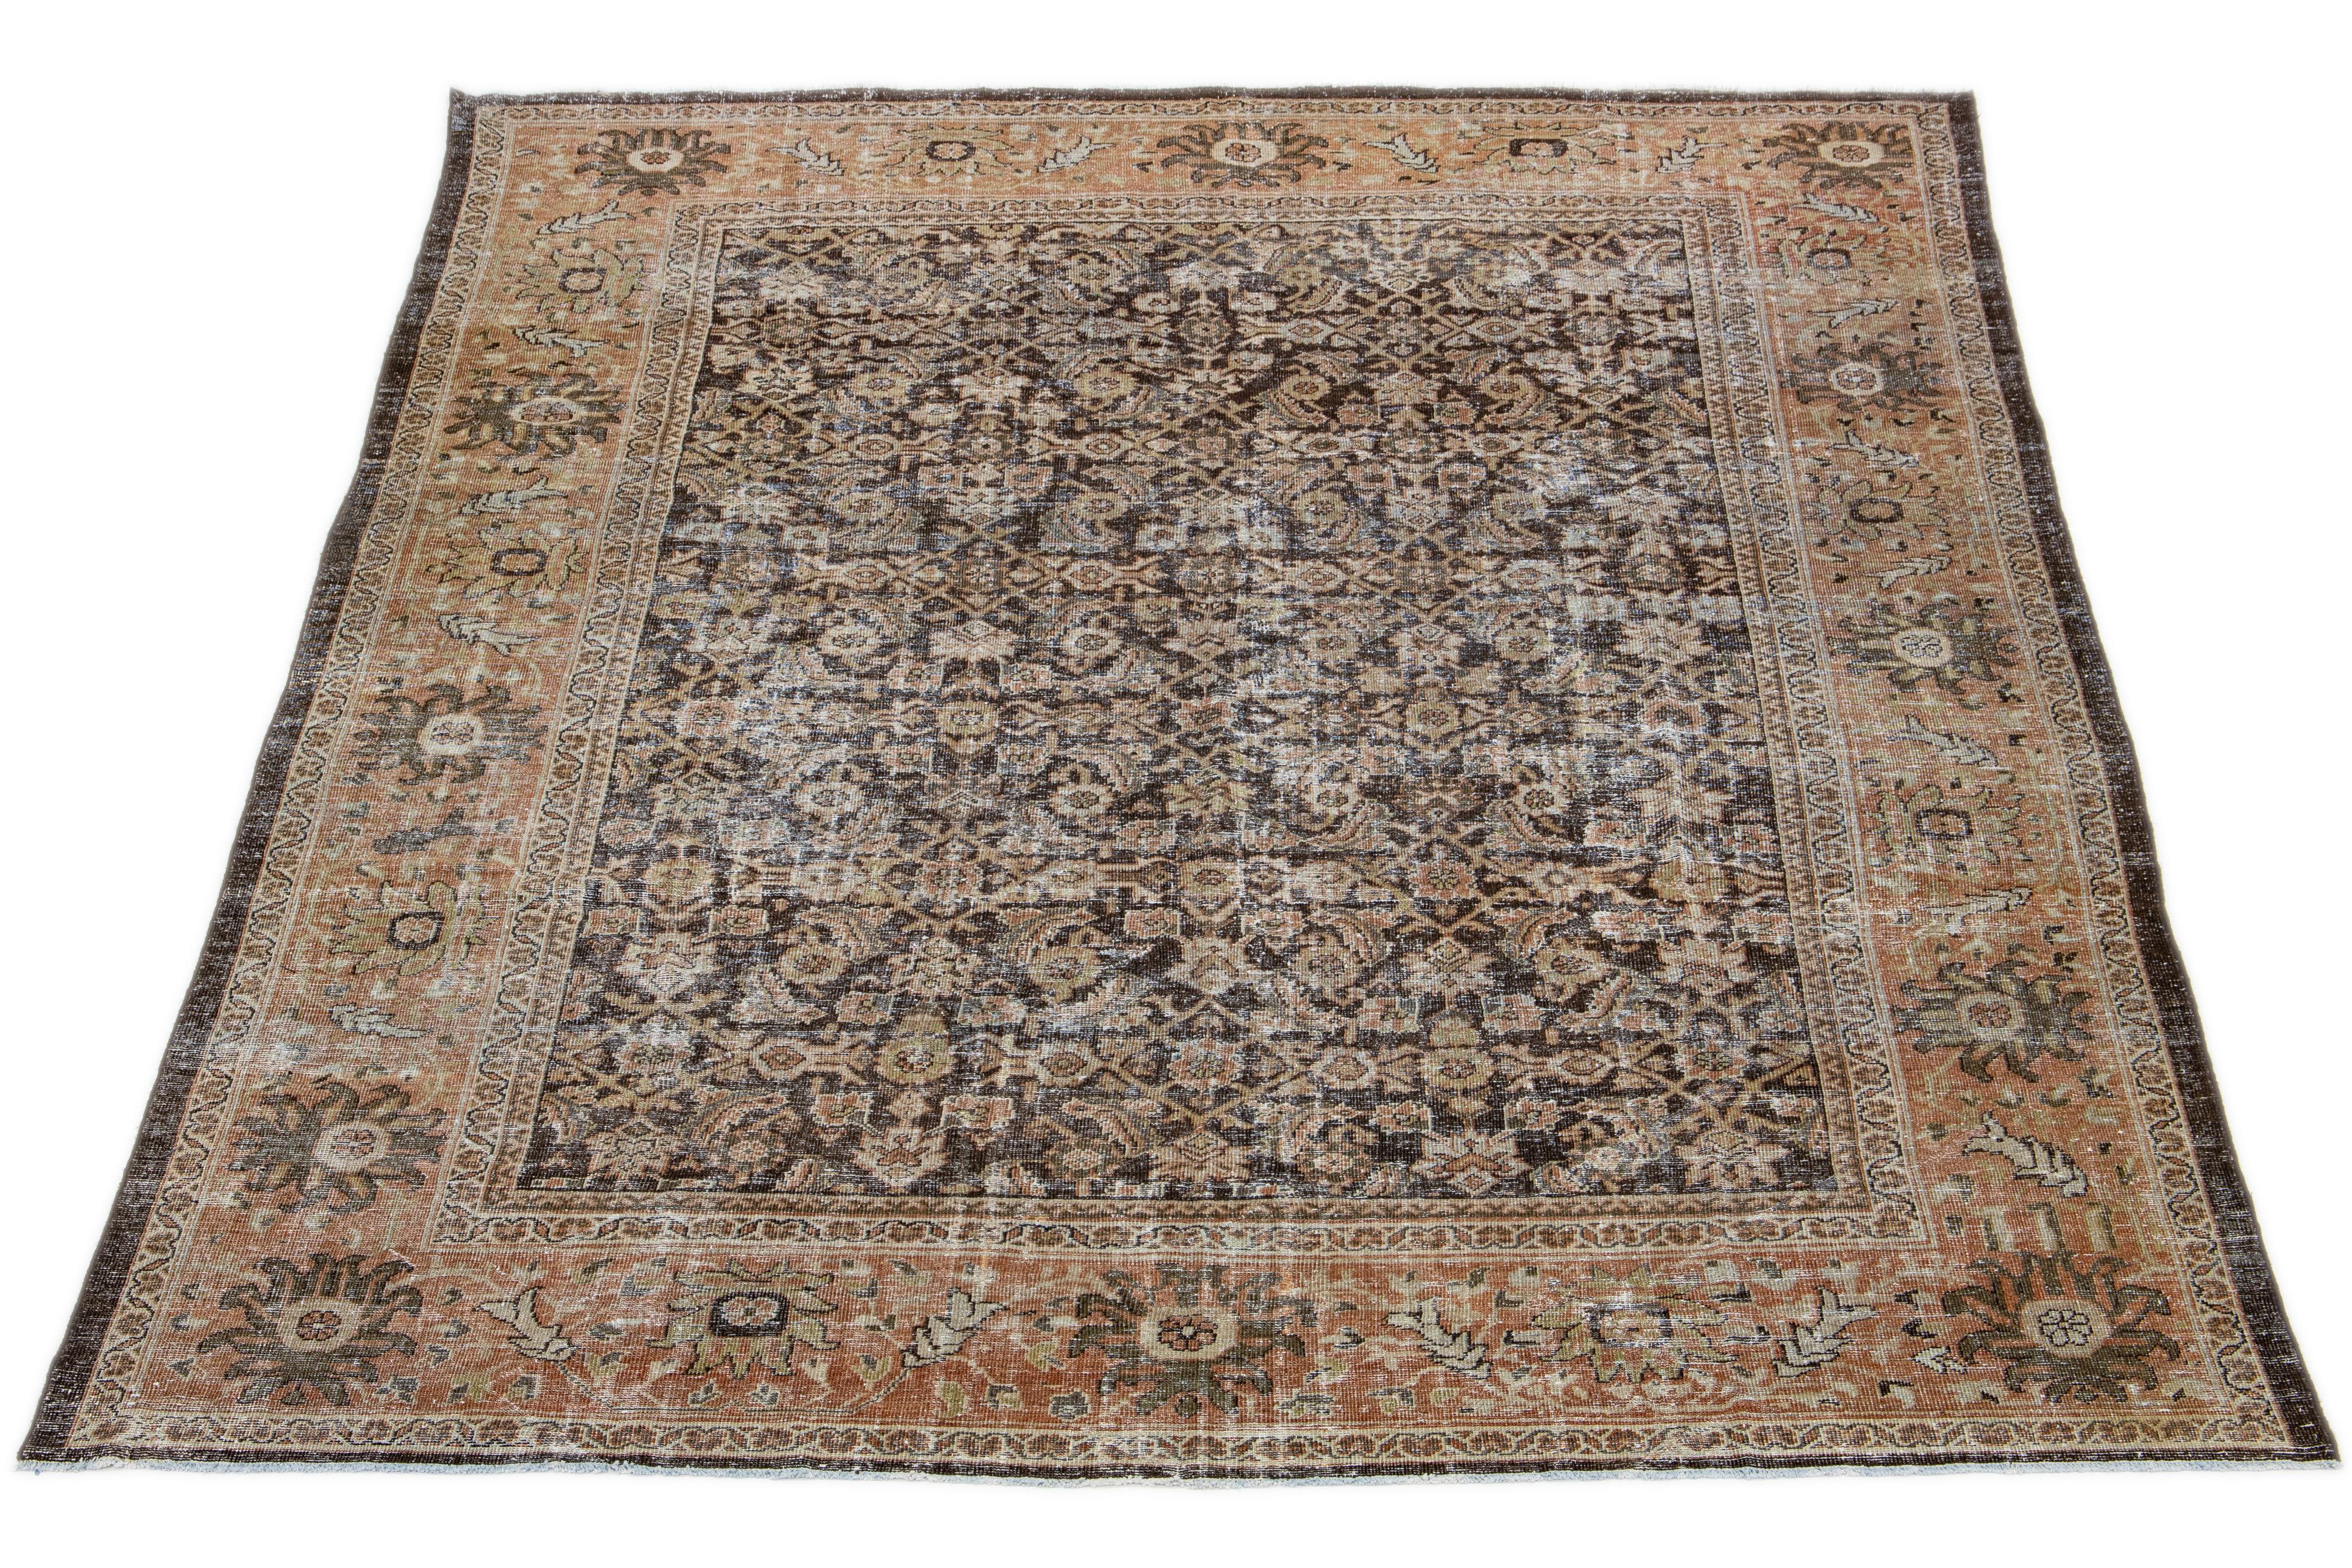 This antique Sultanabad wool rug, which dates back to the 1900s, is skillfully hand-knotted. It displays a brown field with captivating allover patterns in yellow, beige, and rust accents.

This rug measures 10'1